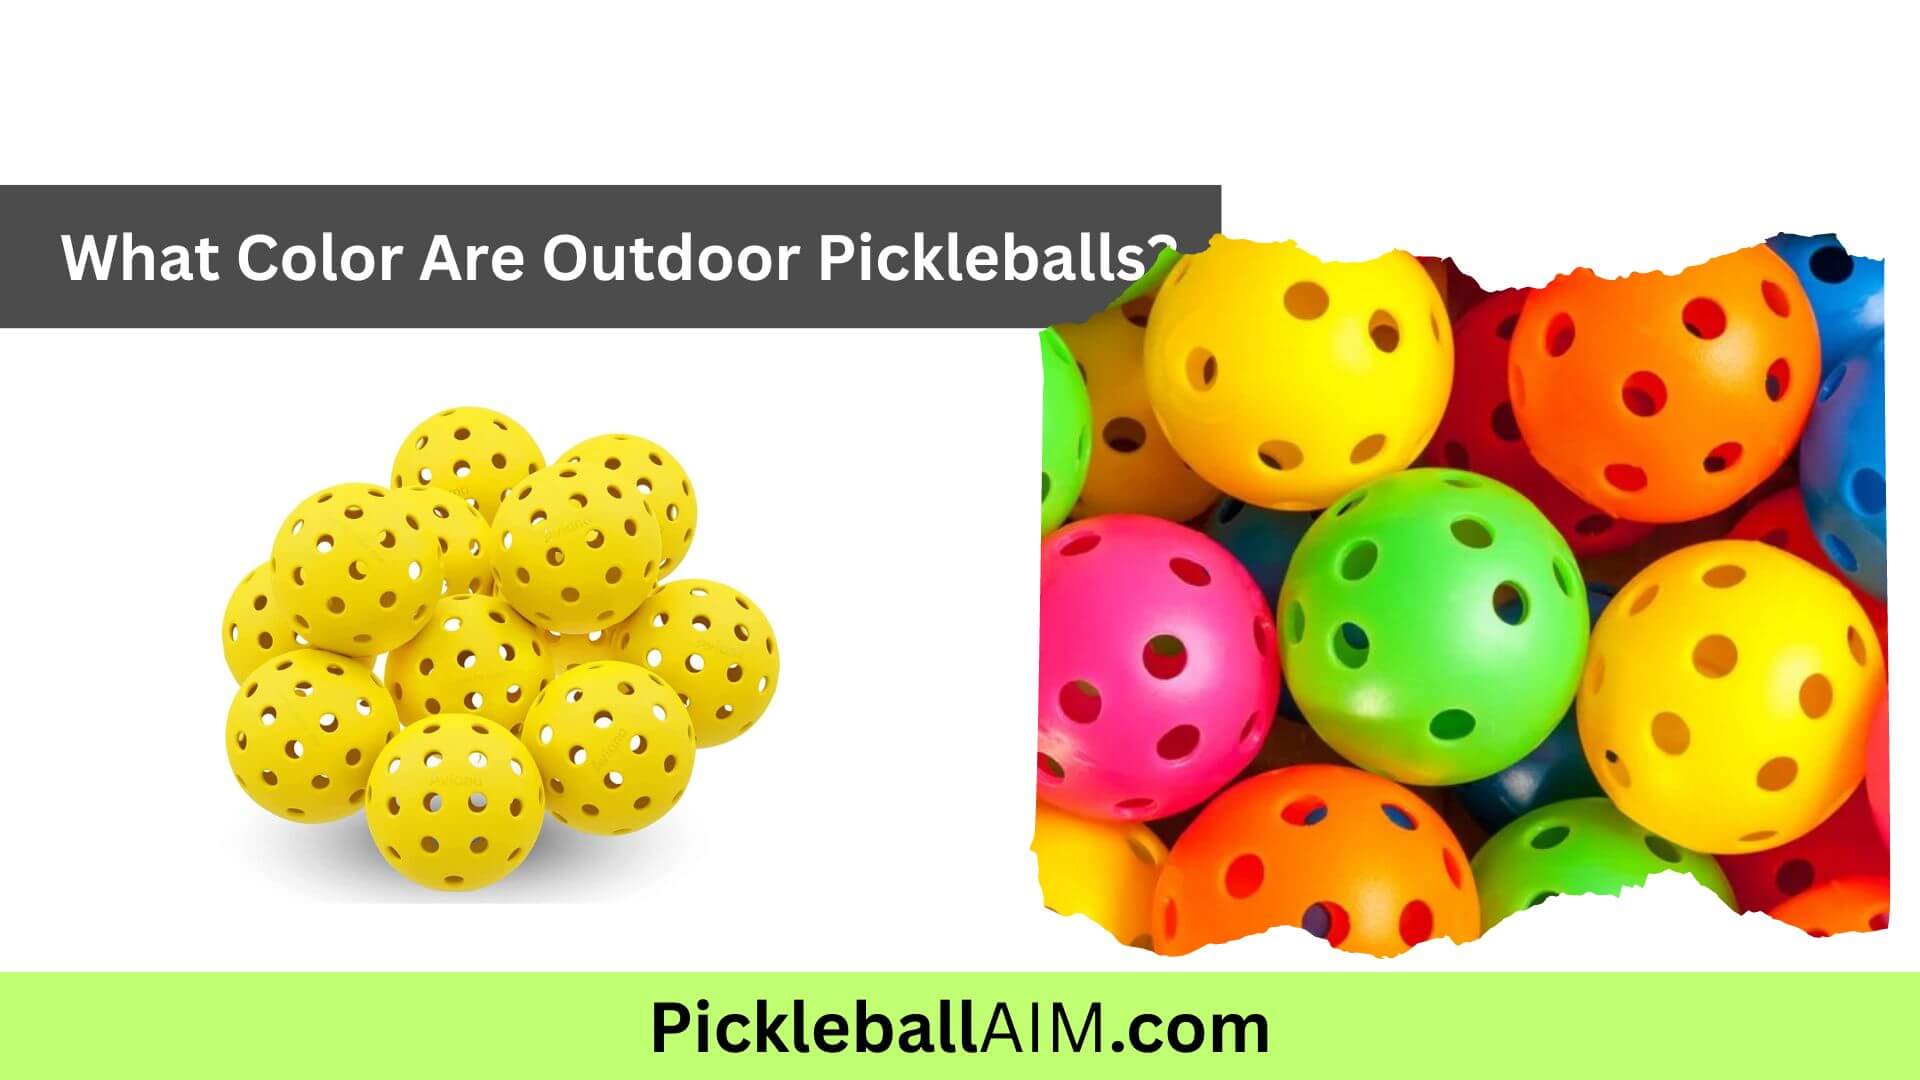 The Vibrant Yellow Outdoor Pickleball Enhancing Visibility and Playability